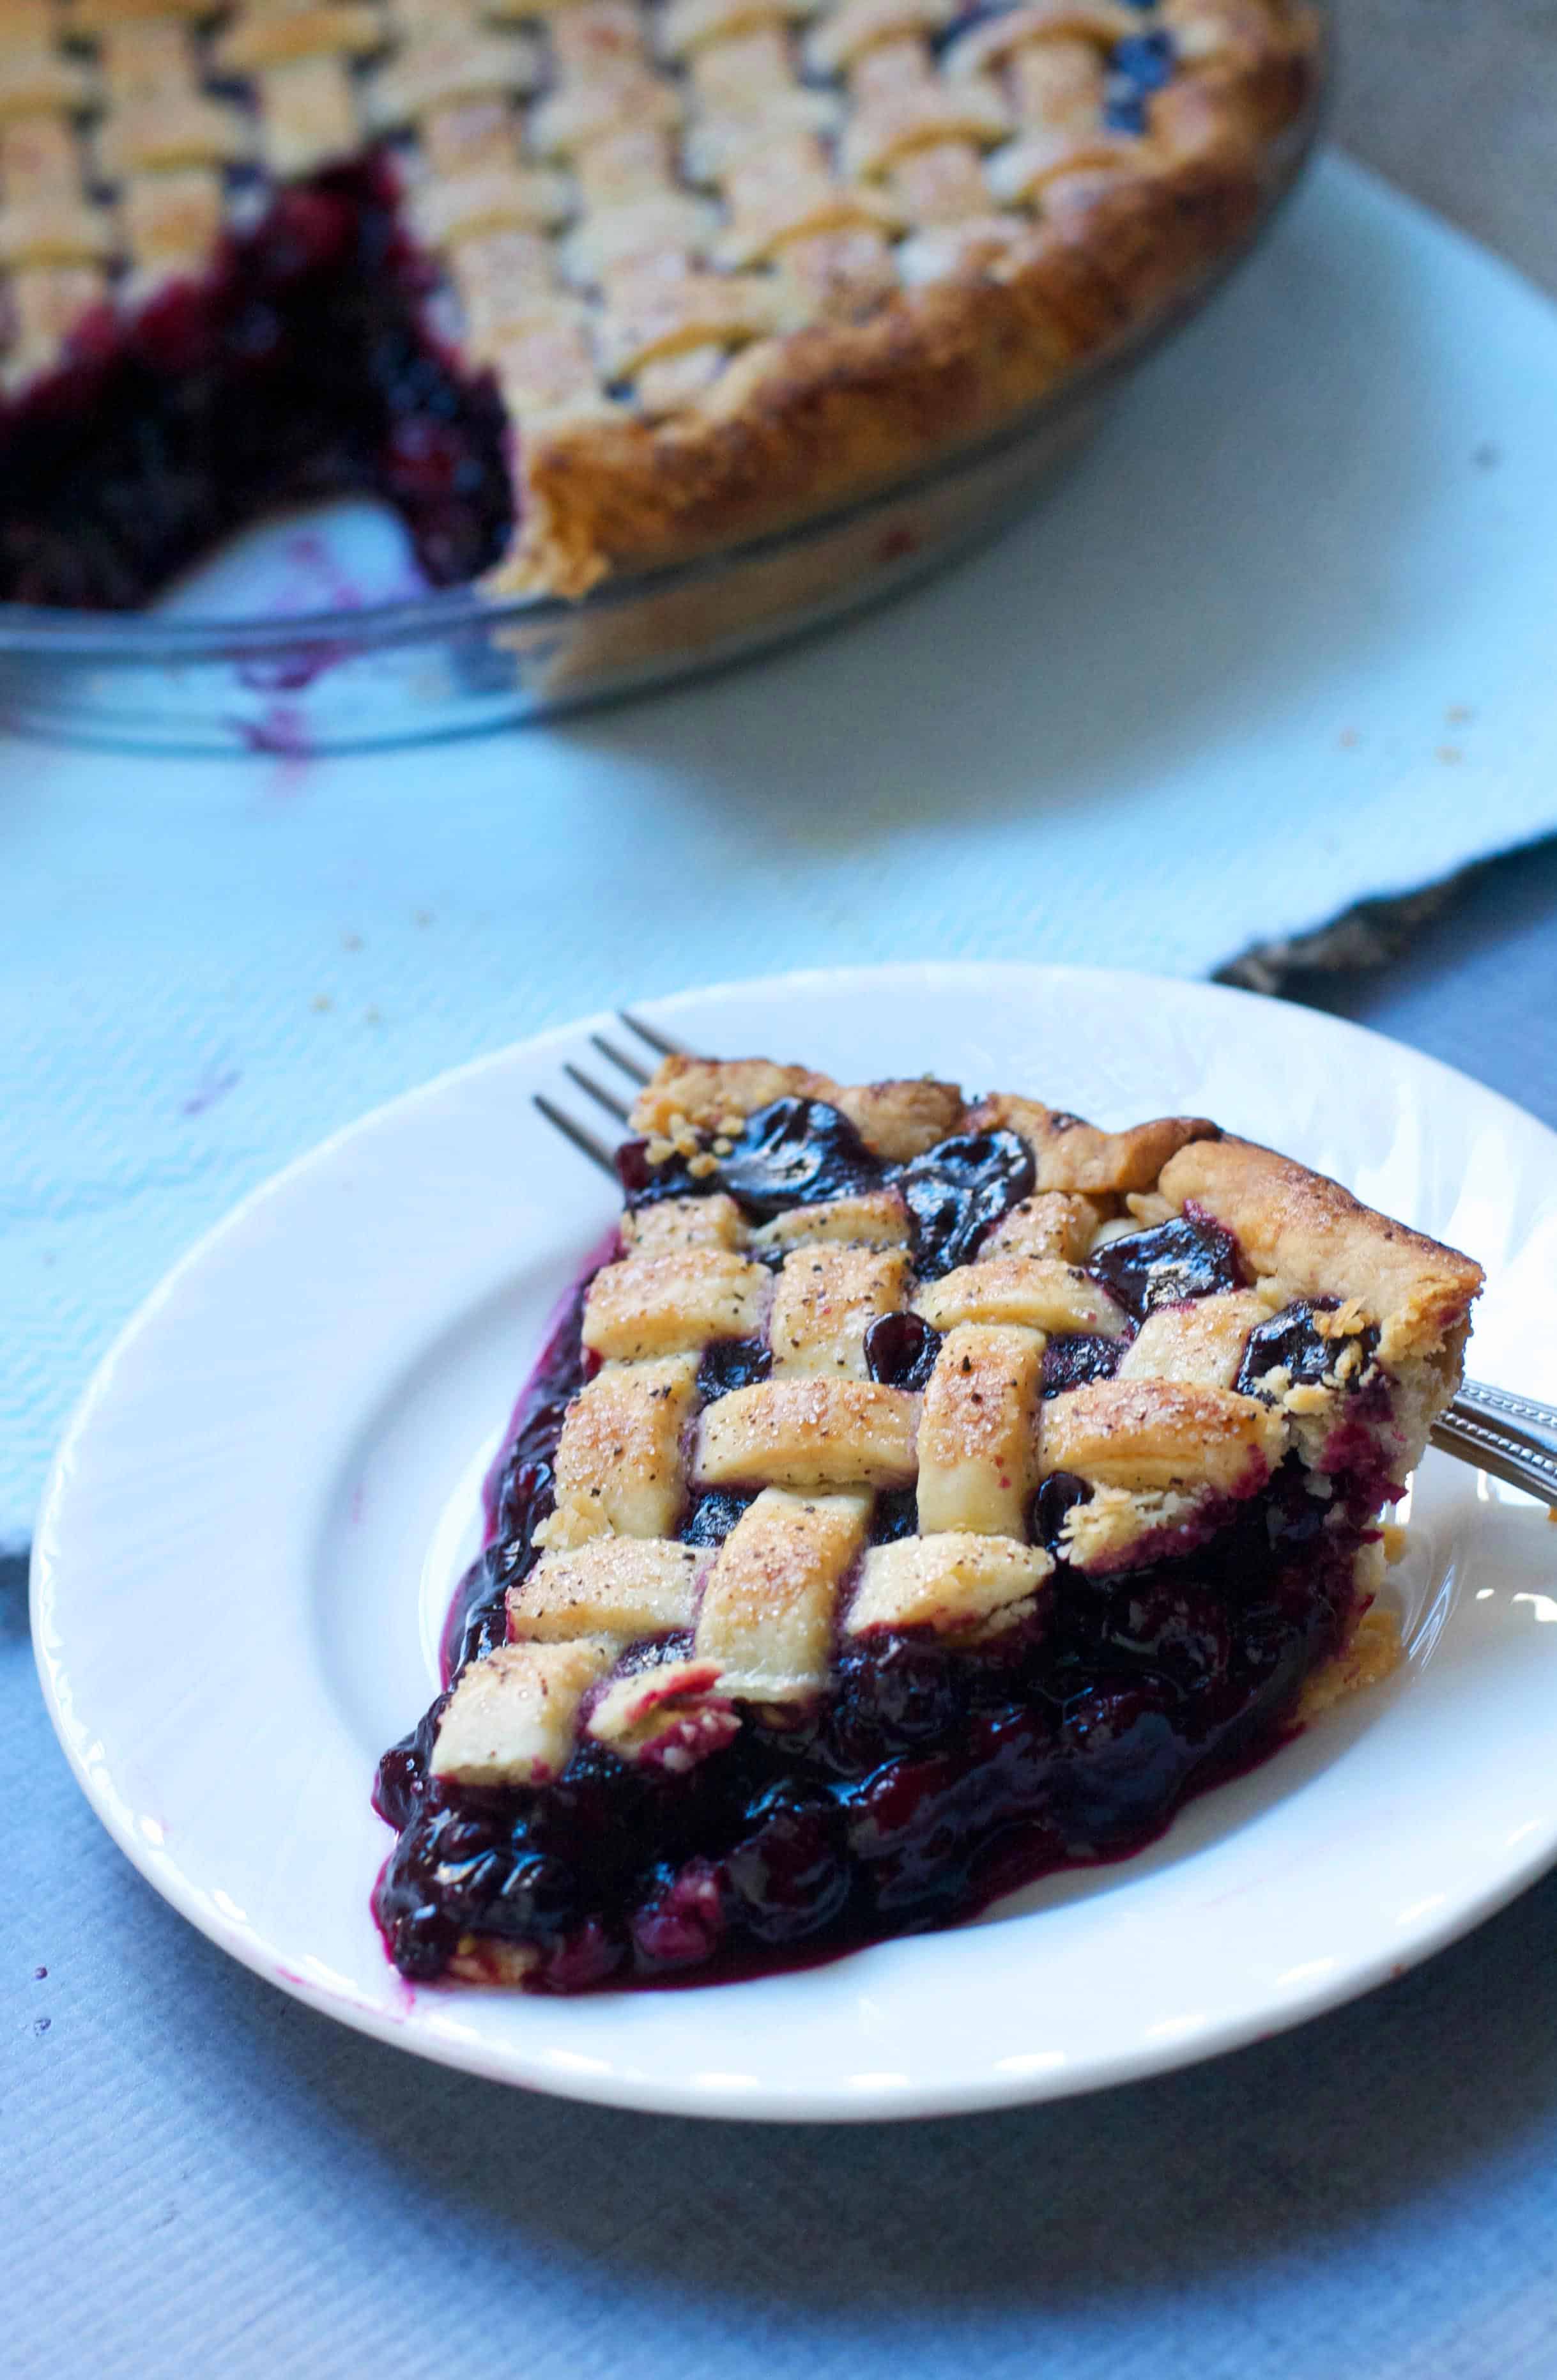 Lattice-topped Cranberry Blueberry Pie - The Baker Chick